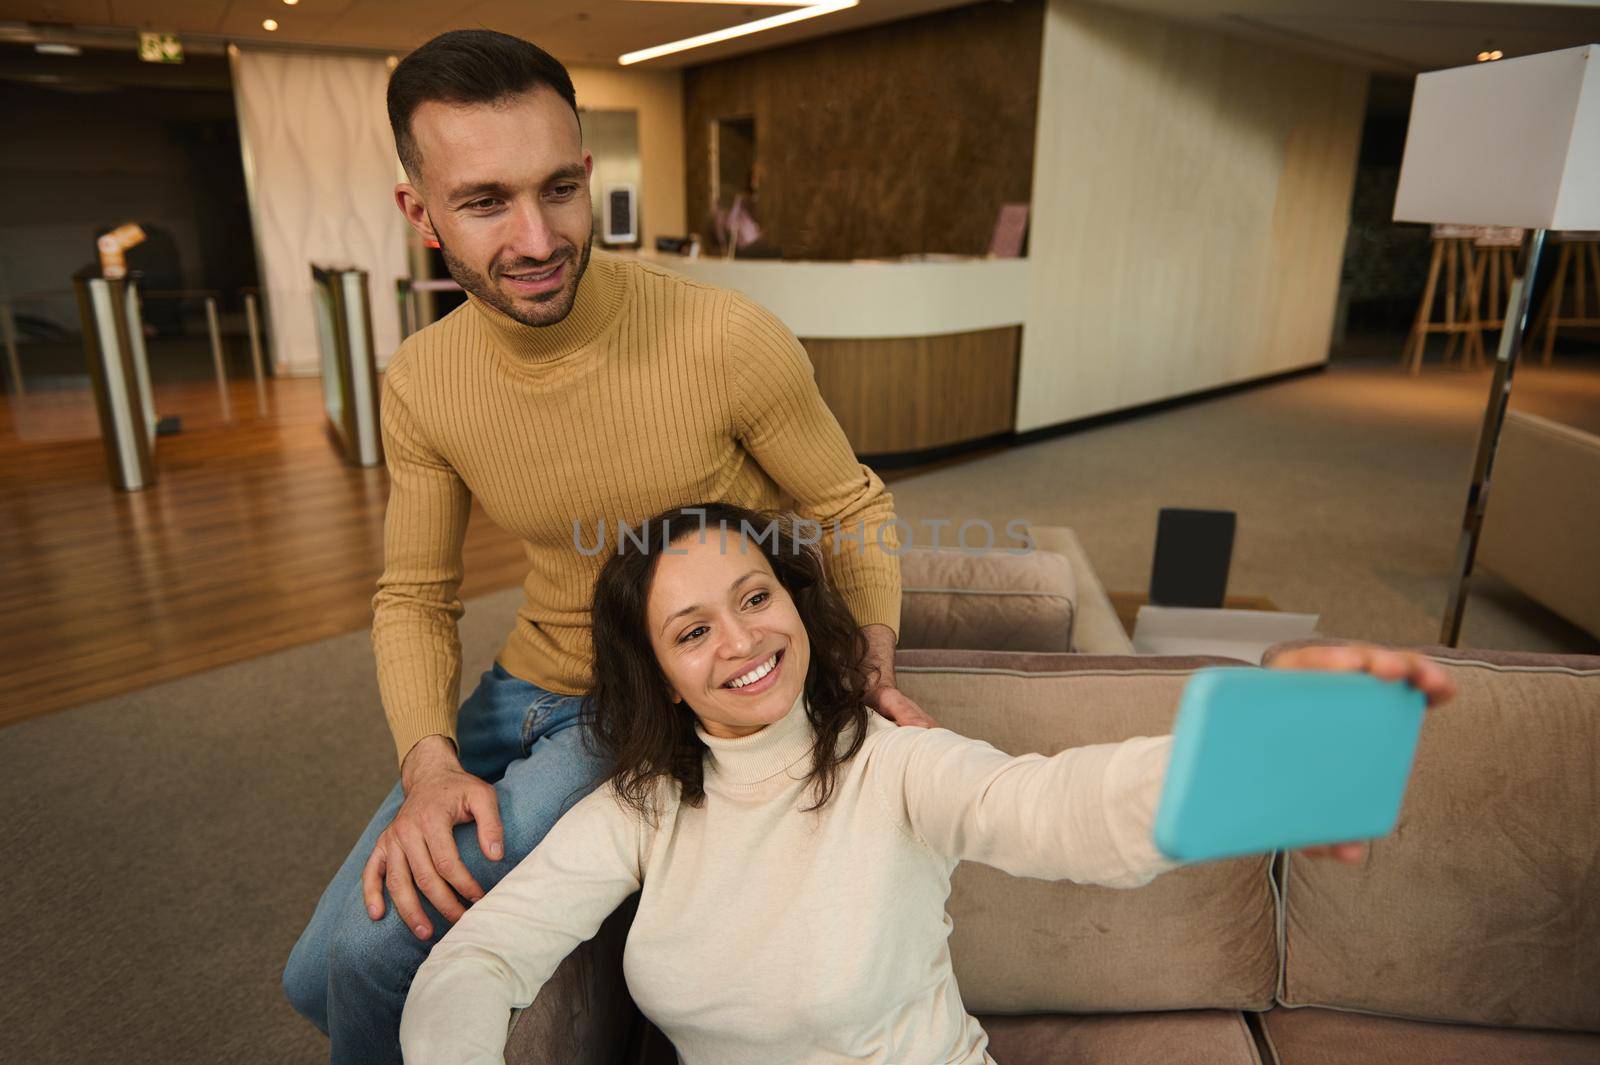 Beautiful Hispanic woman sitting next to her boyfriend and making a selfie on smartphone while resting together in the lounge zone of the airport departure terminal while waiting for a flight by artgf